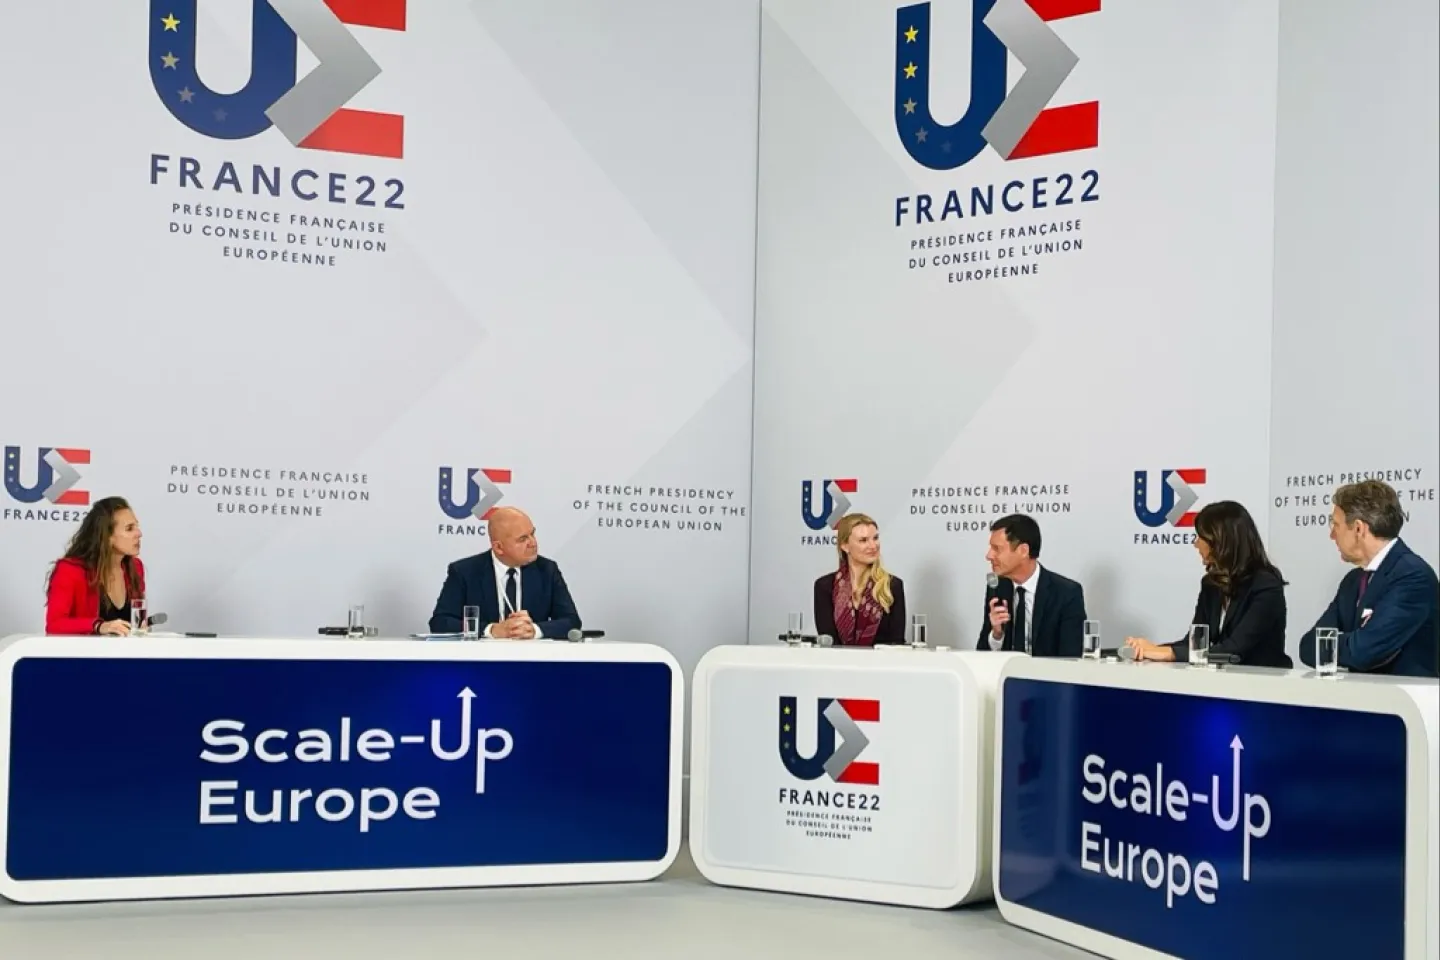 Scale-Up Europe 